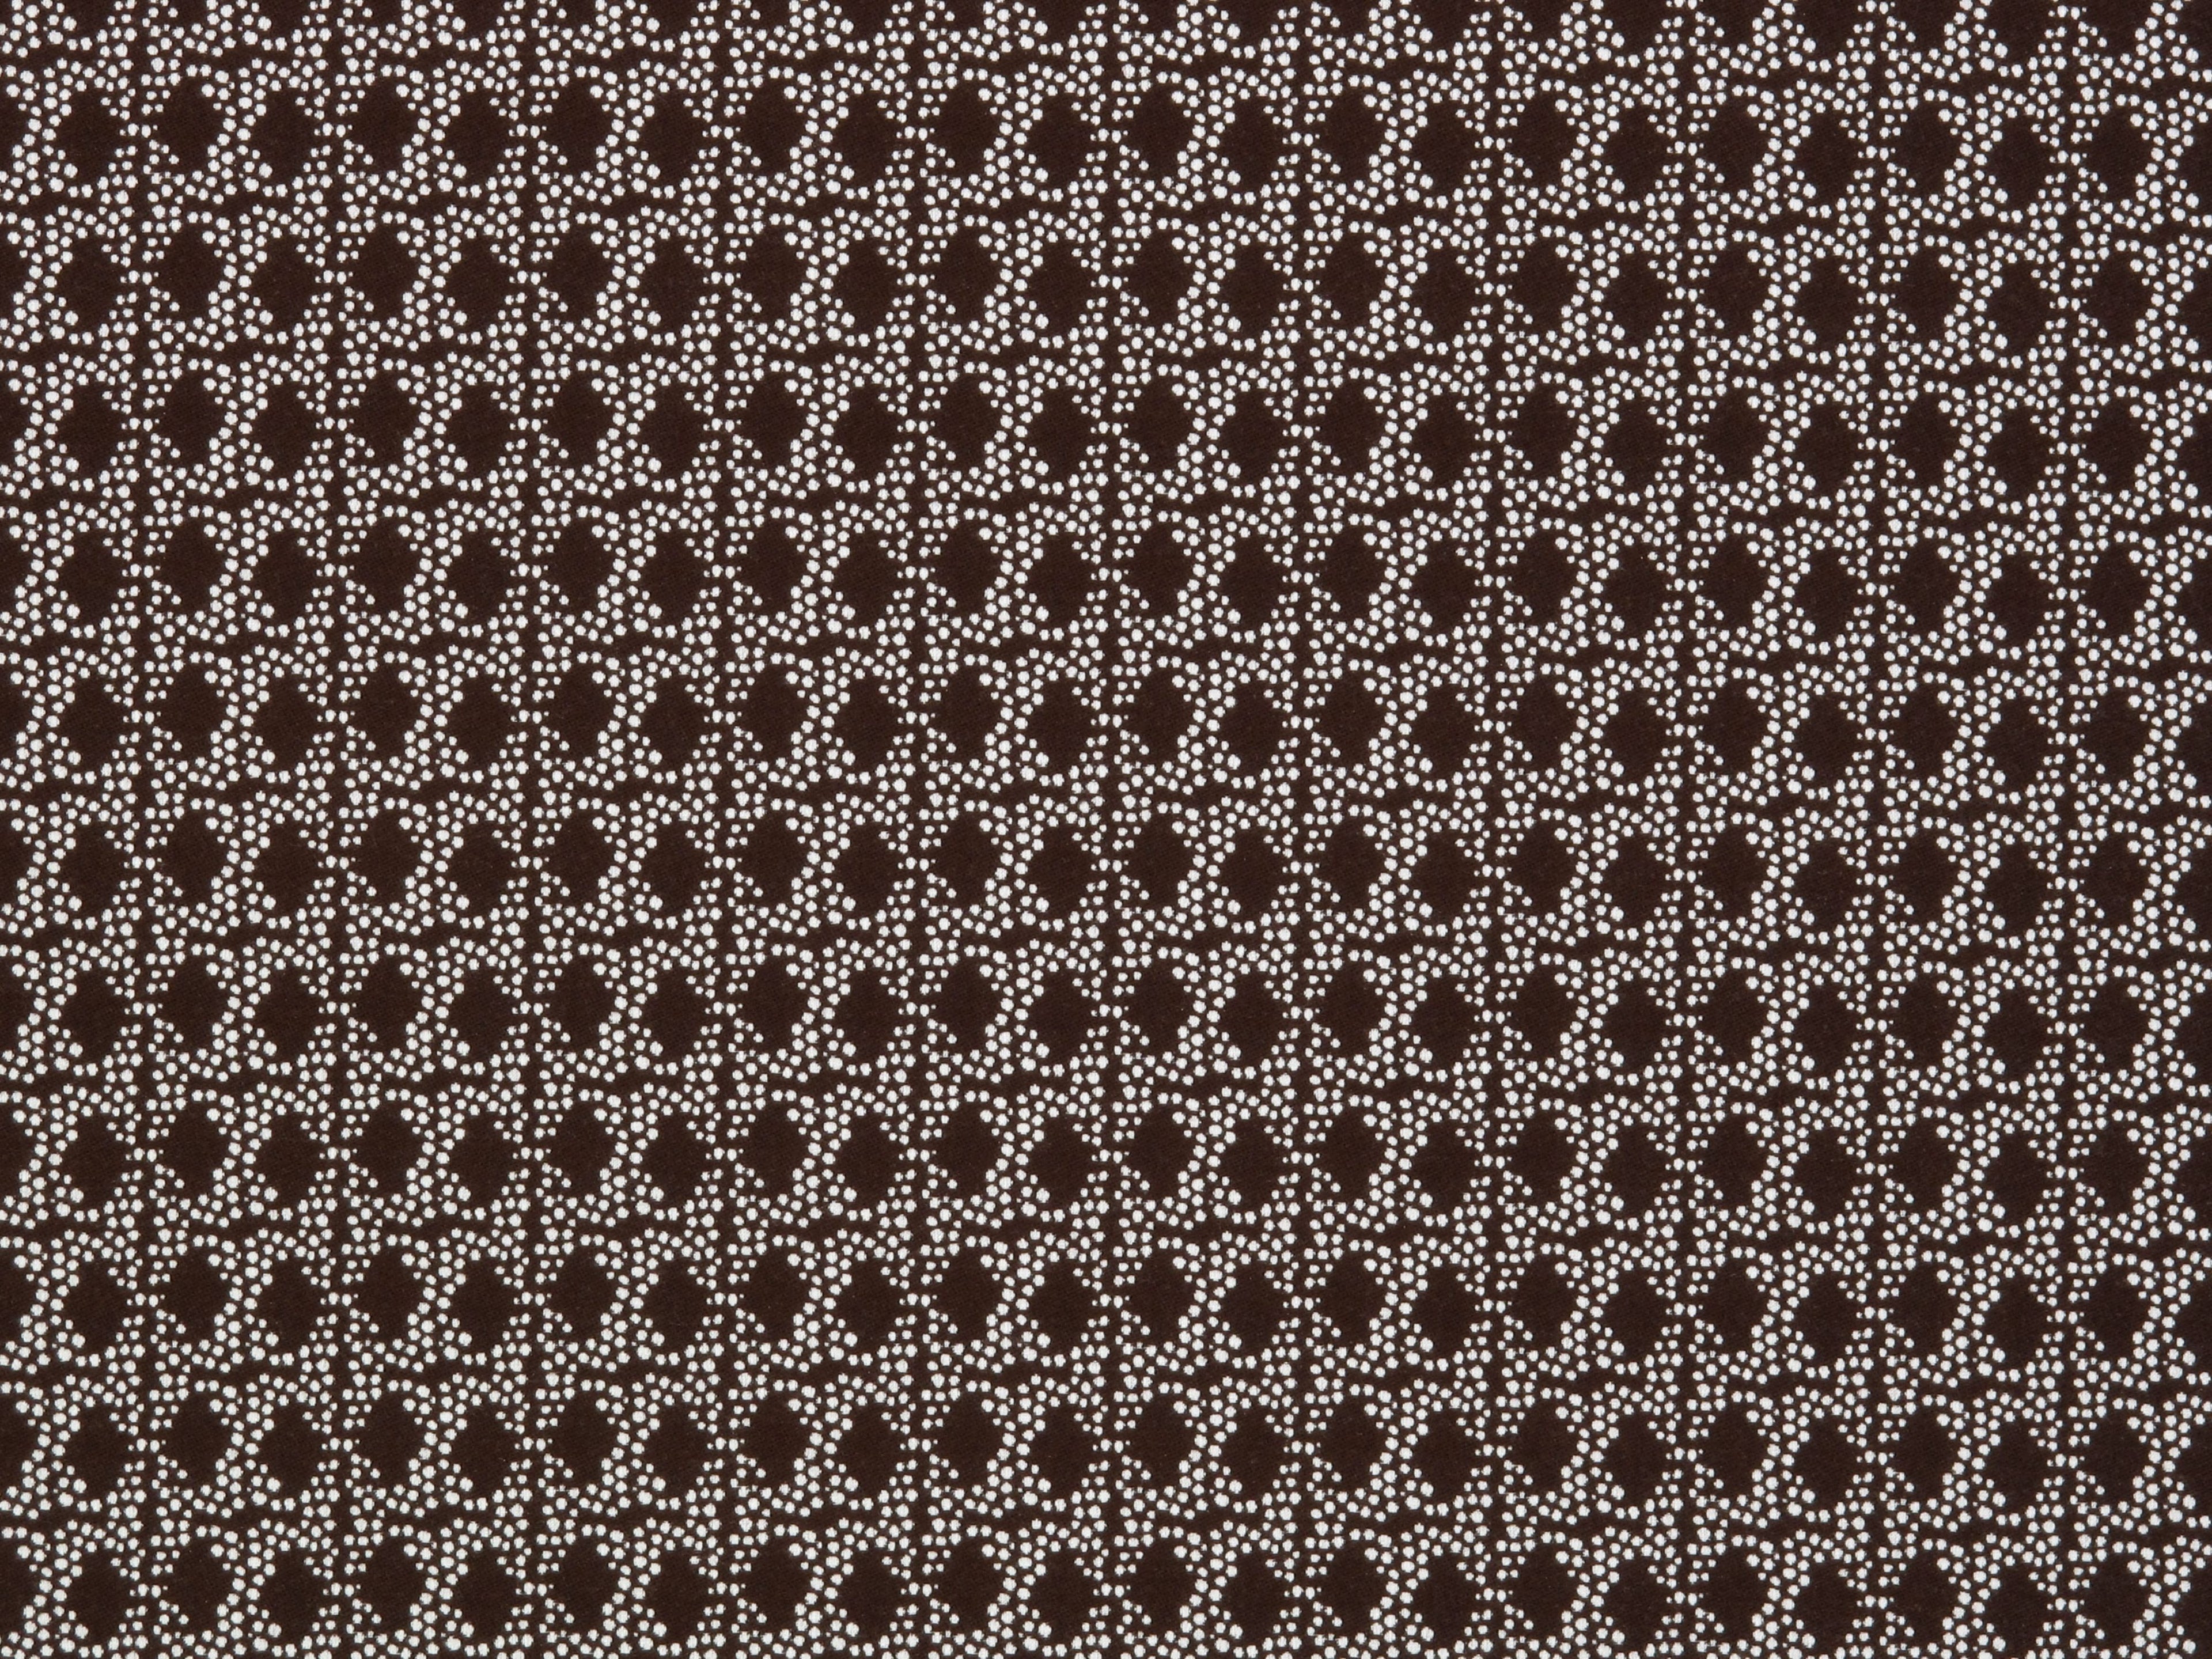 Pebbles fabric in espresso color - pattern number SU 4301PEBB - by Scalamandre in the Old World Weavers collection